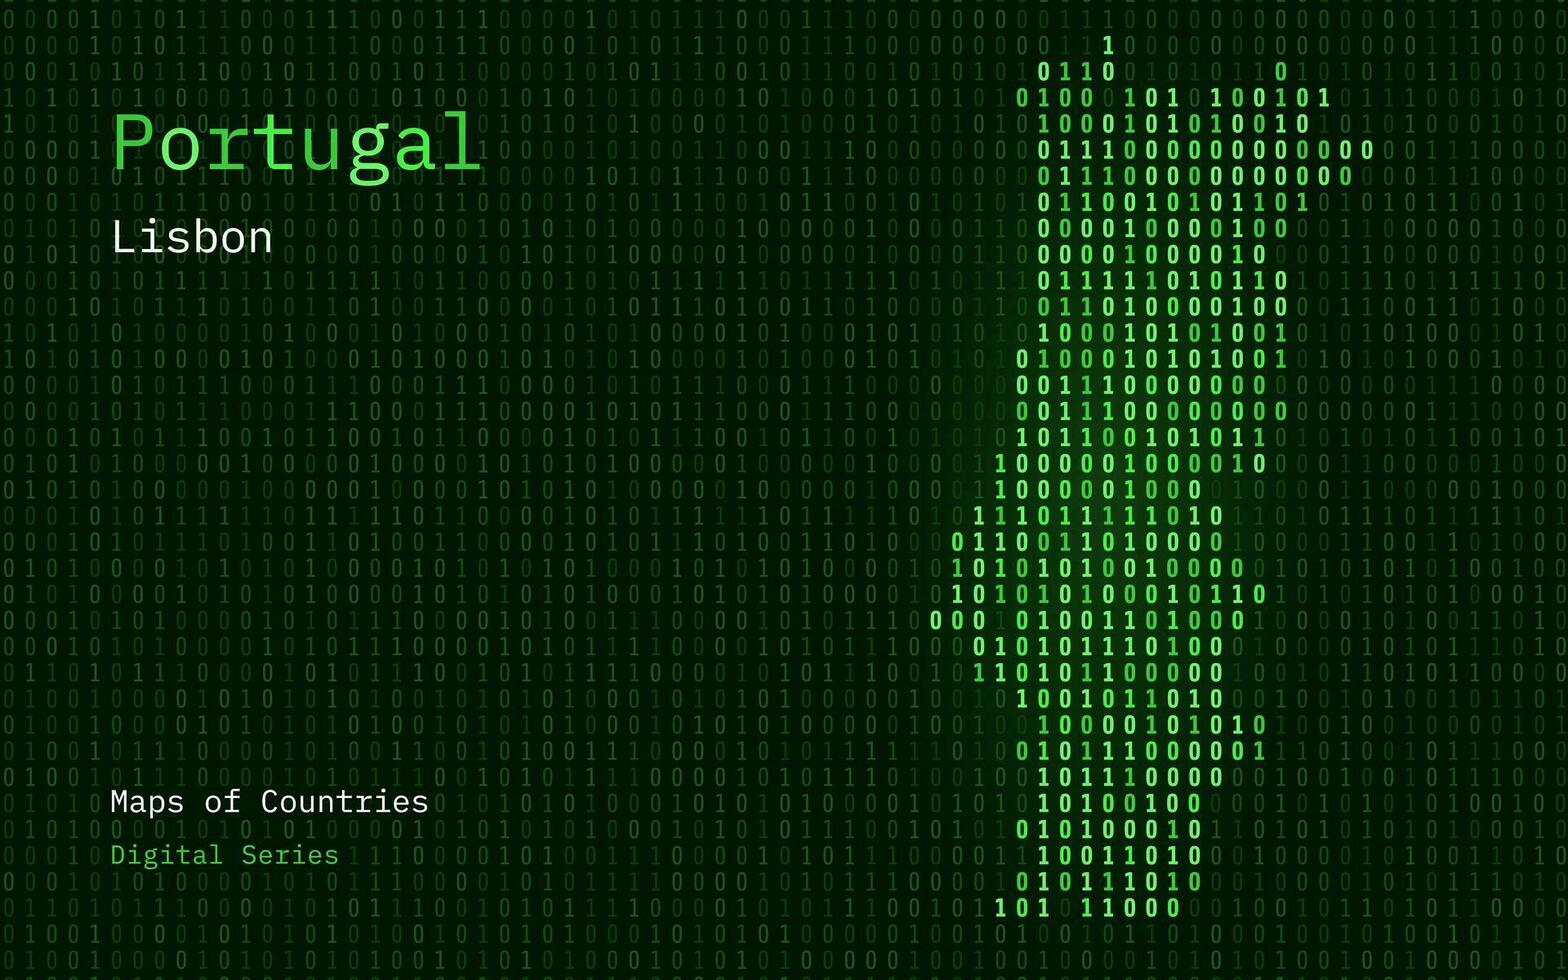 Portugal Green Map Shown in Binary Code Pattern. Matrix numbers, zero, one. World Countries Vector Maps. Digital Series